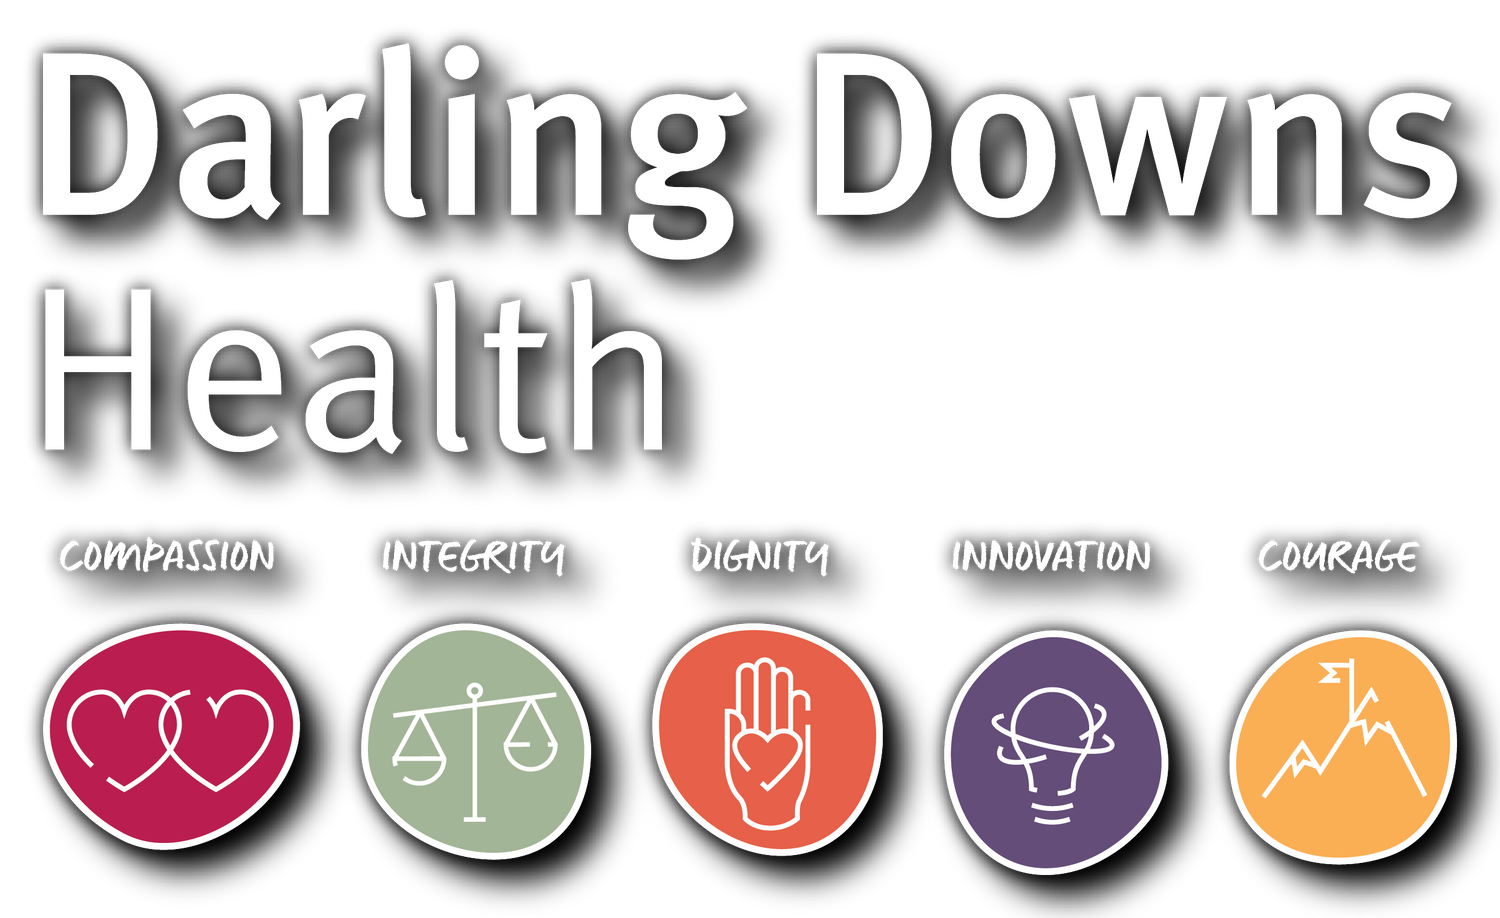 Darling Downs Health Values